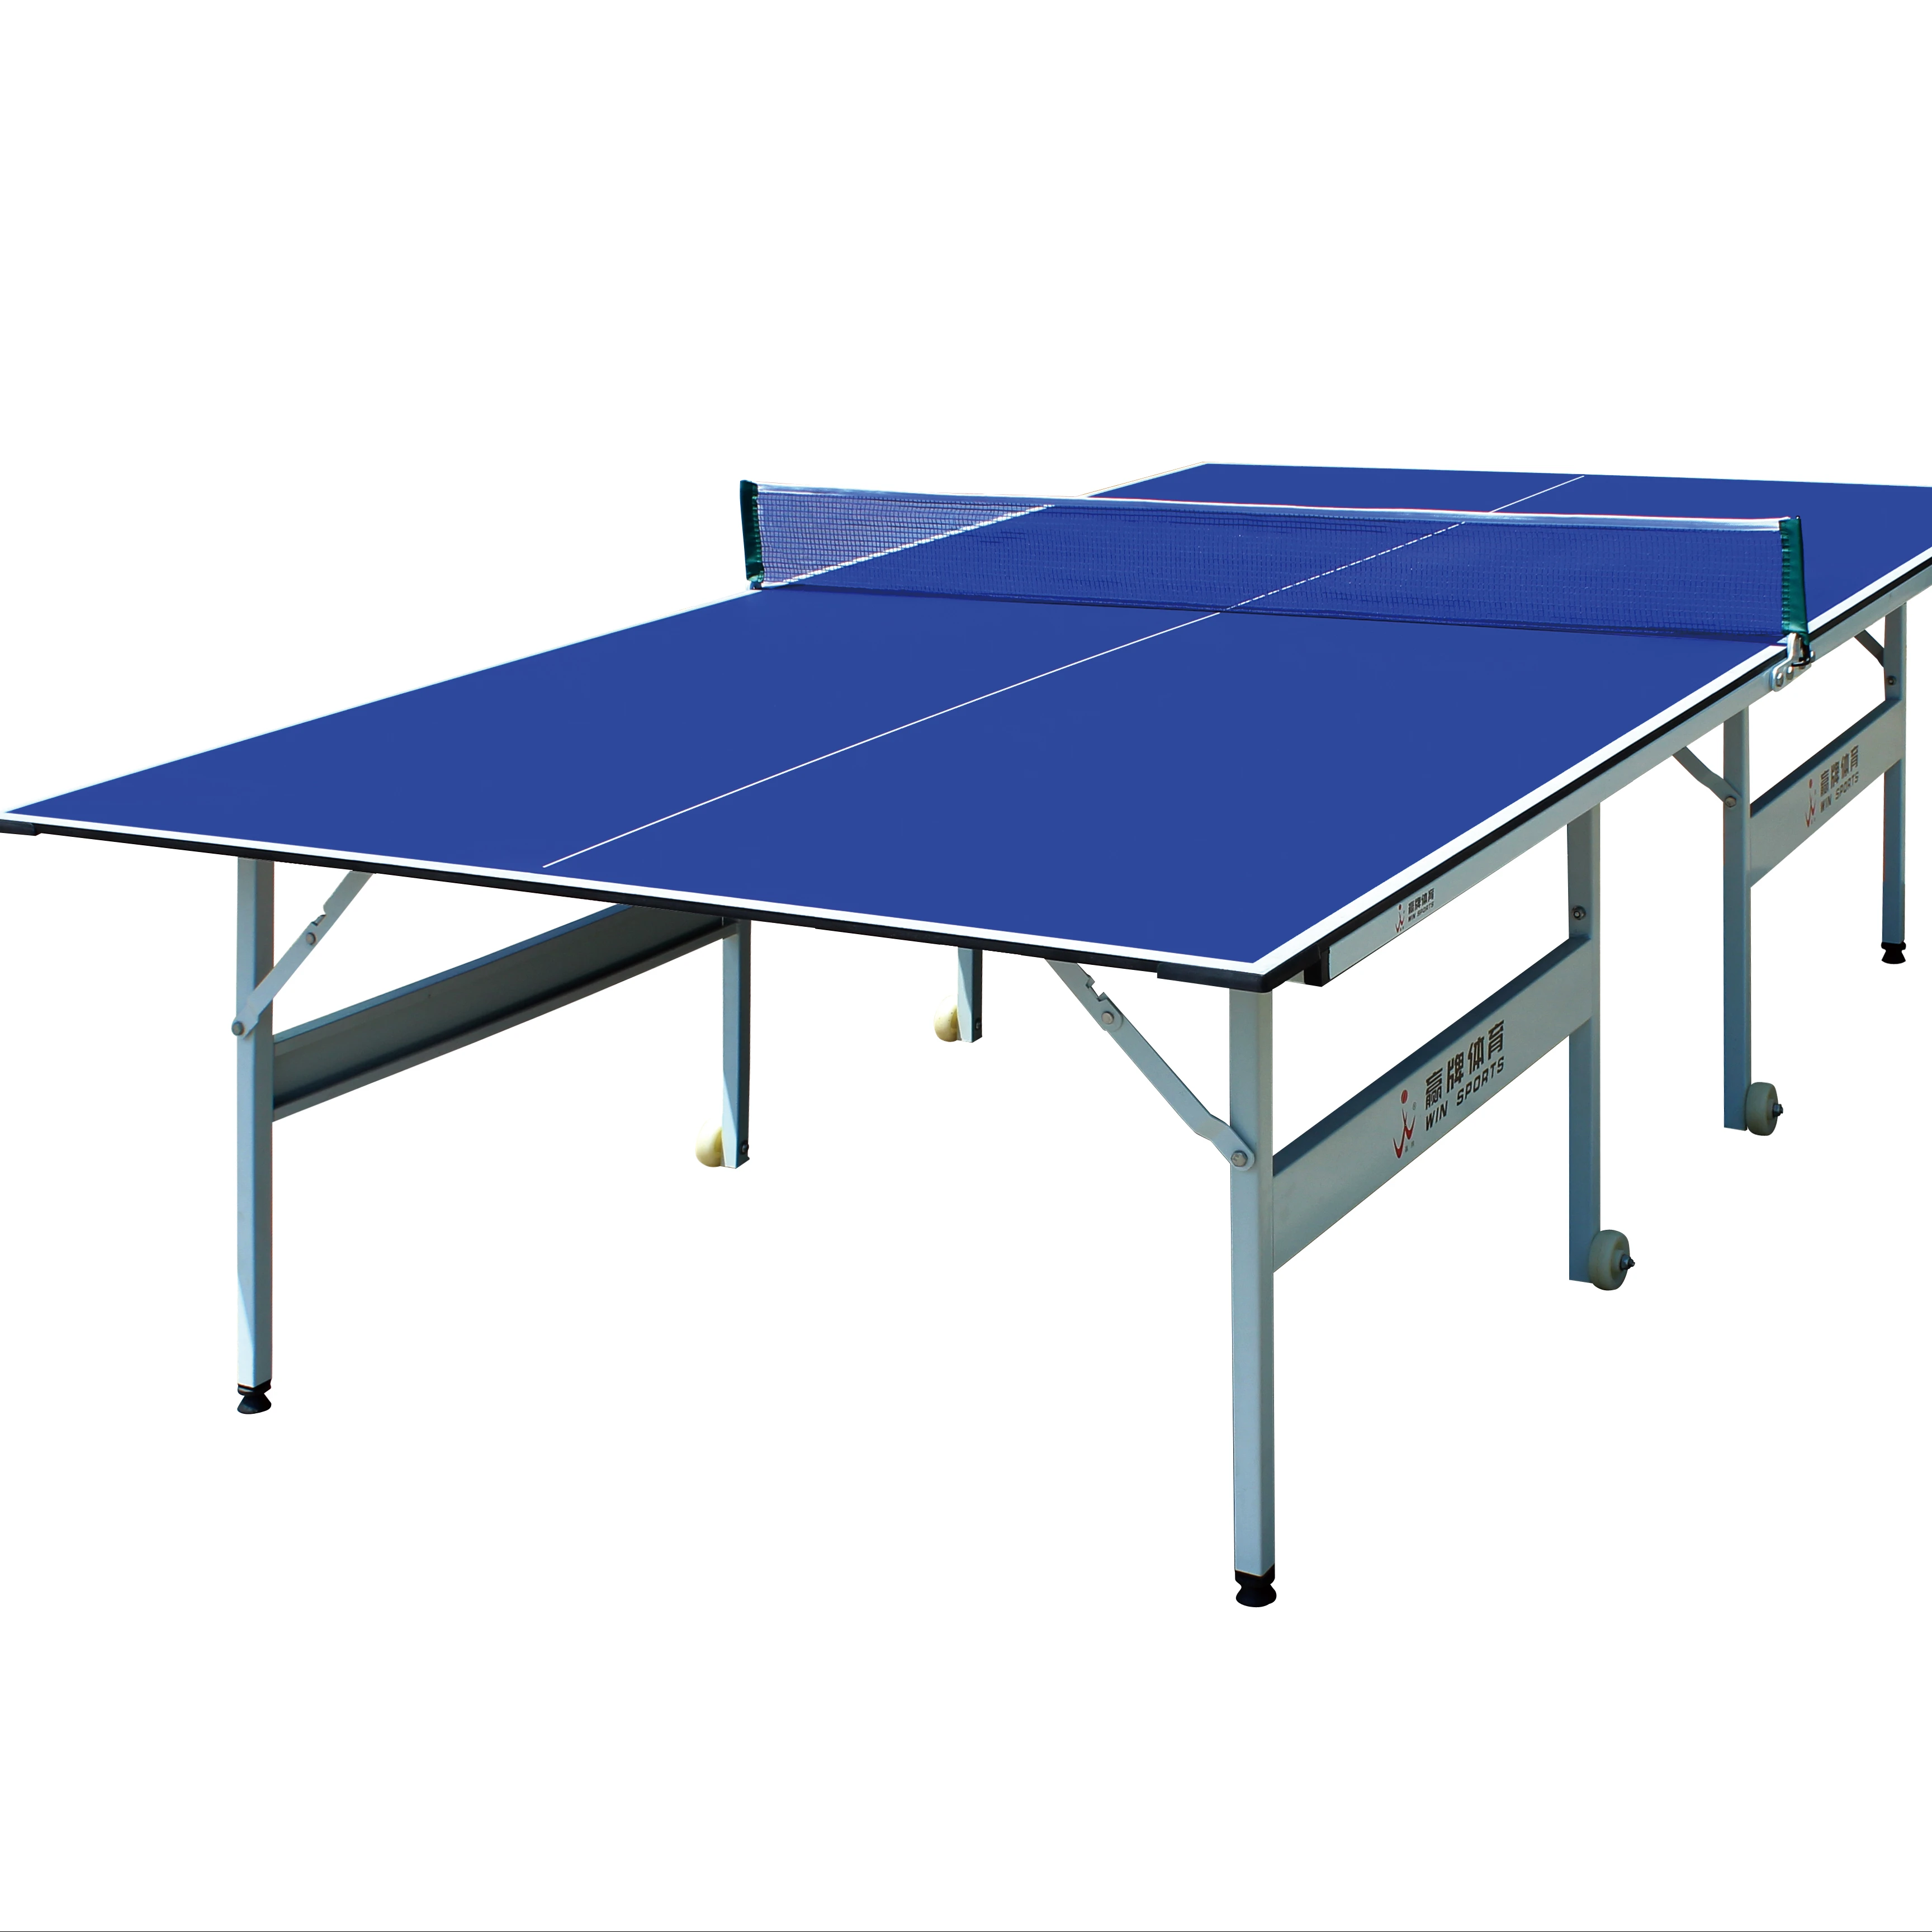 

BUY 2020!!! hot sale factory durable very cheap indoor removable folding folded pingpong table tennis tables china, Green/blue top